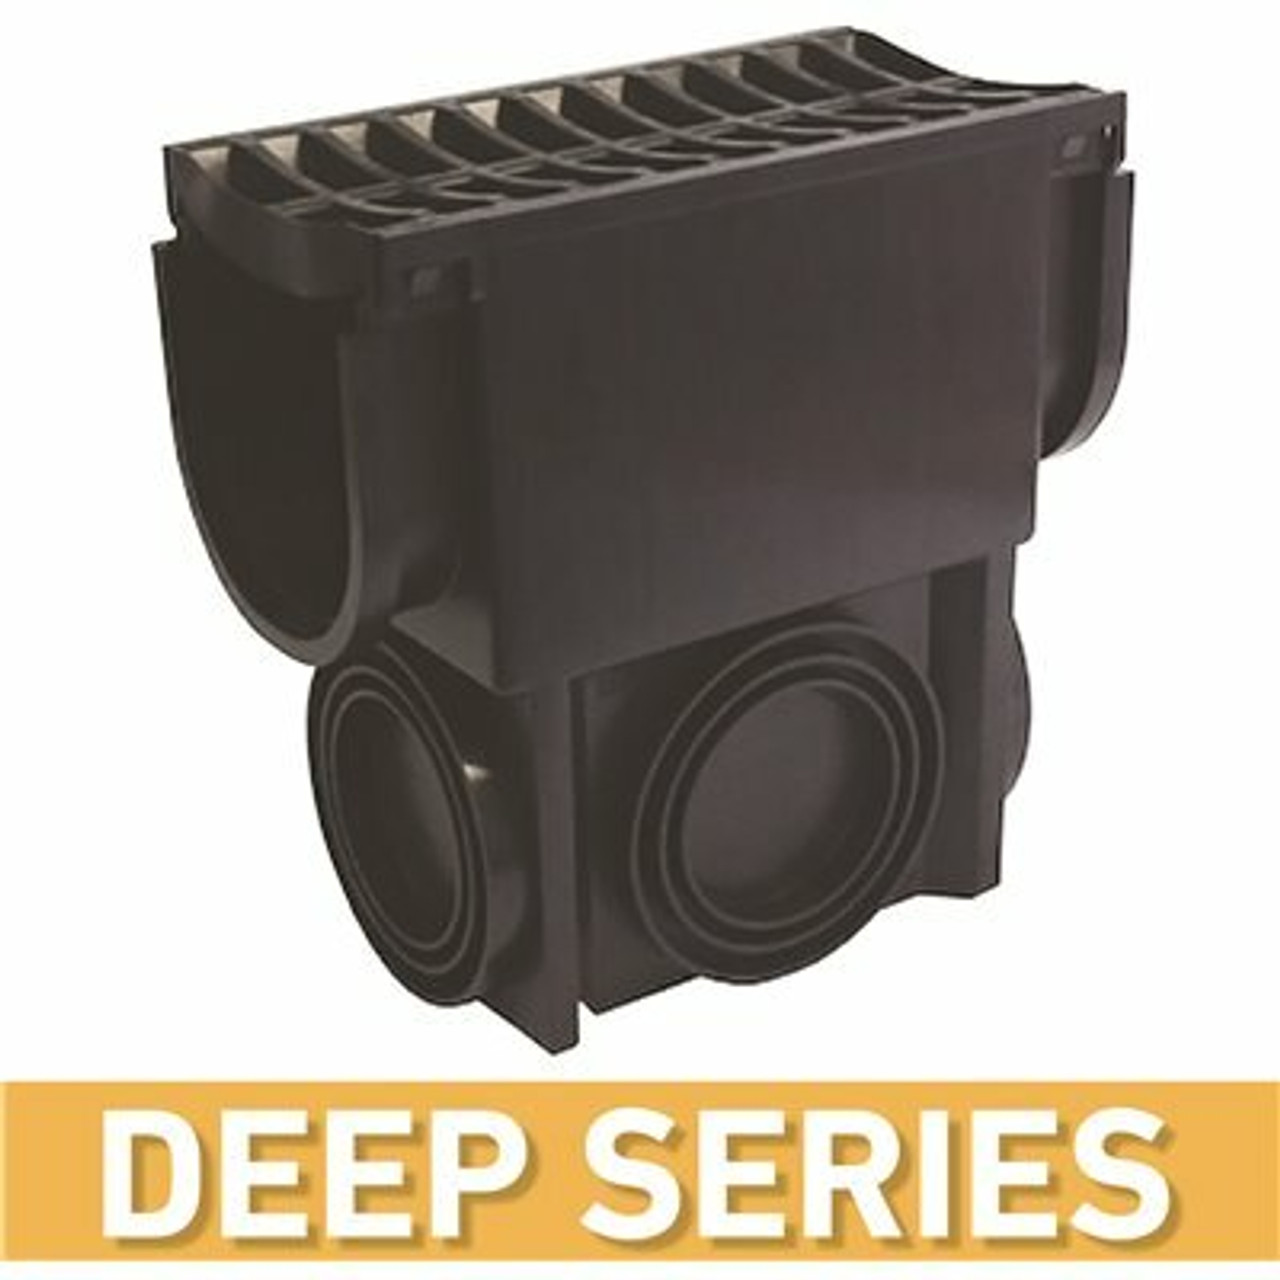 U.S. Trench Drain Deep Series Black Slim Drainage Pit And Catch Basin For Modular Trench And Channel Drain Systems